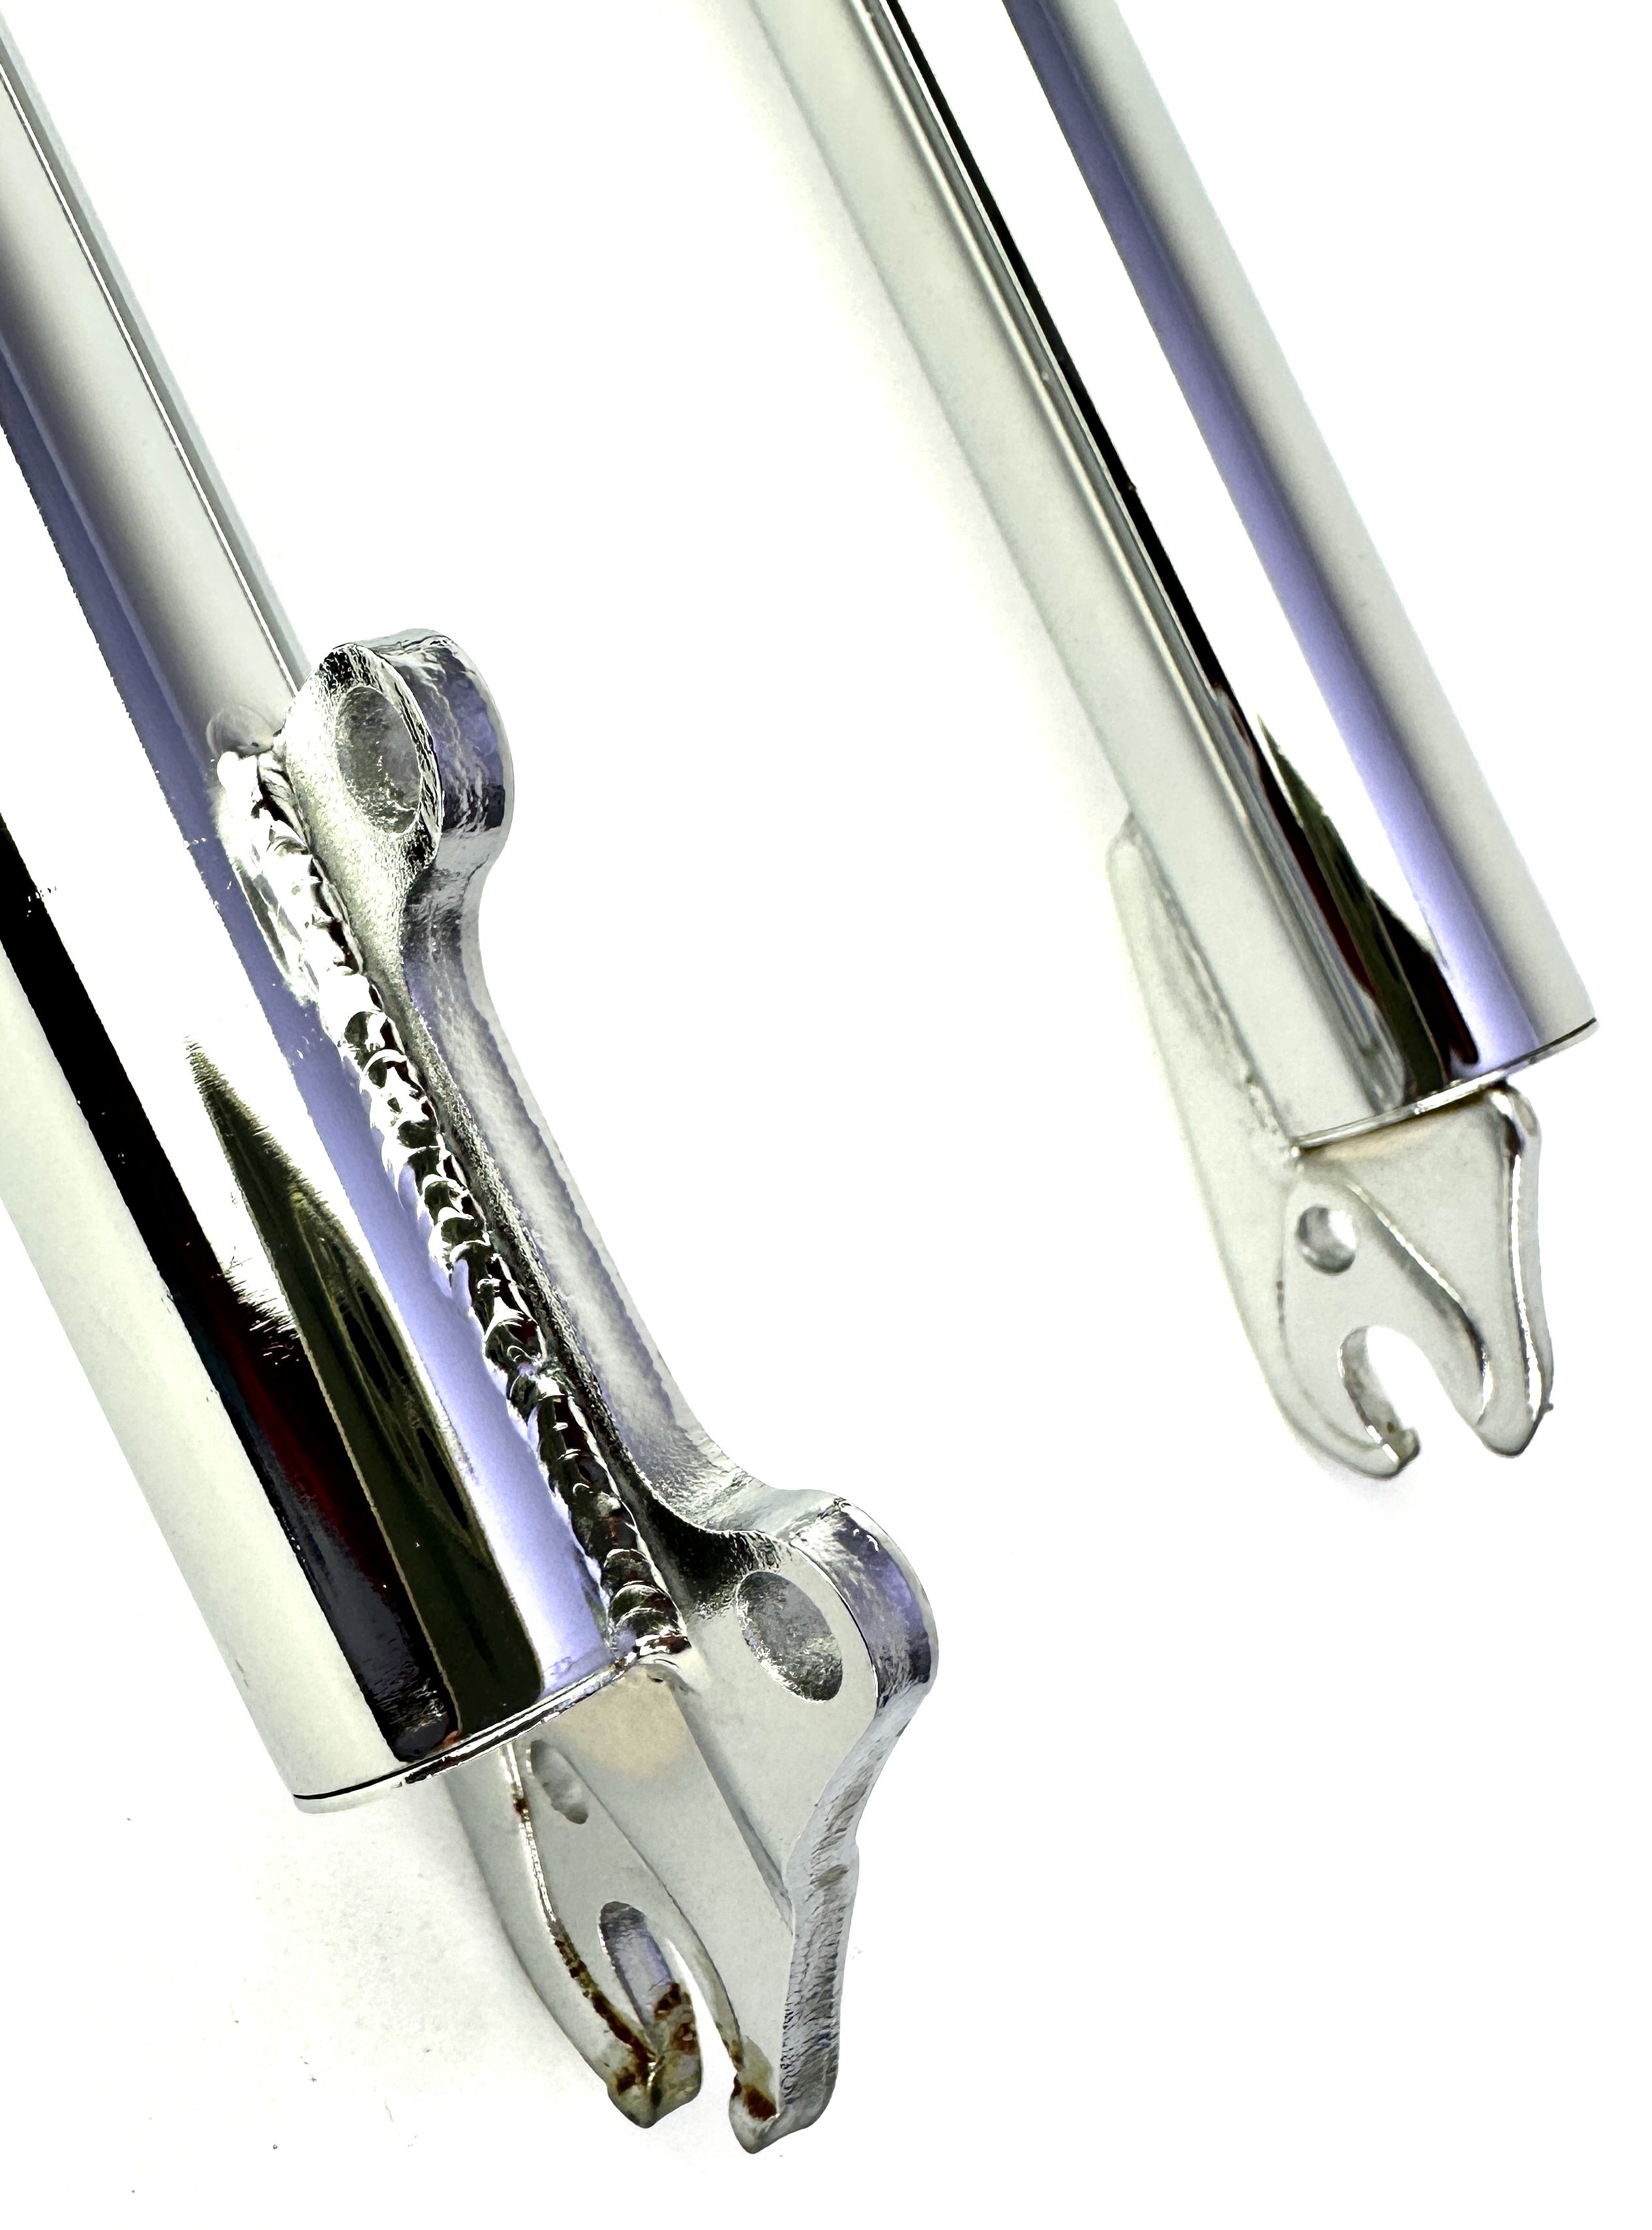 1-Double crown fork 570 mm chrome plated 1 inch shaft